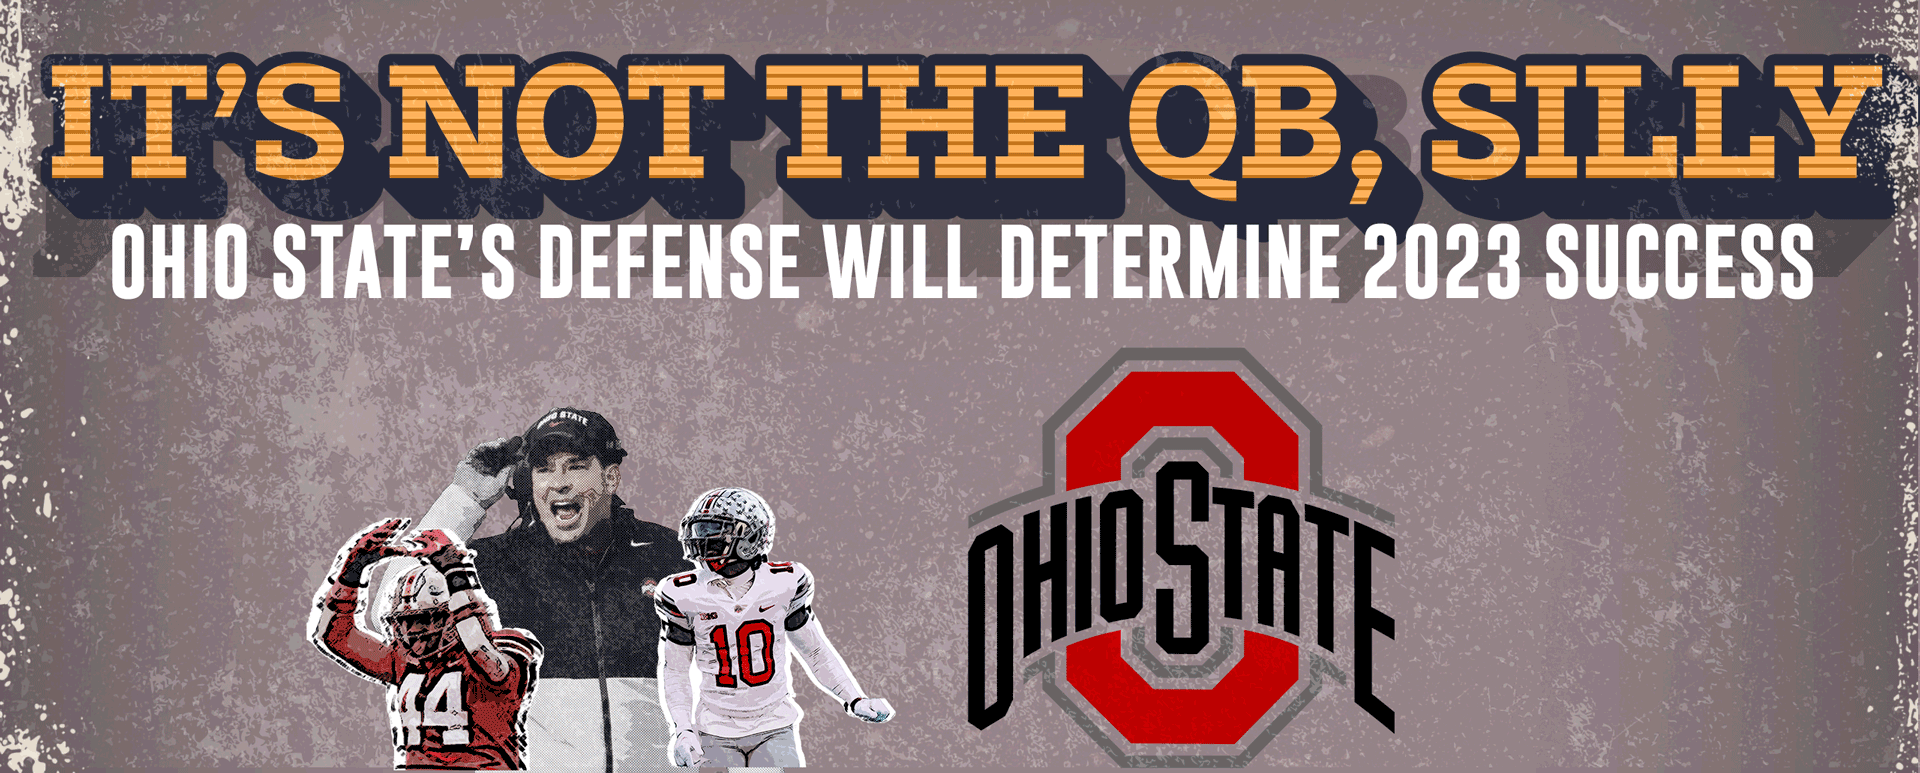 The Road to a 2023 National Championship for Ohio State Will Be Paved Goes Through Defense, Not Quarterback